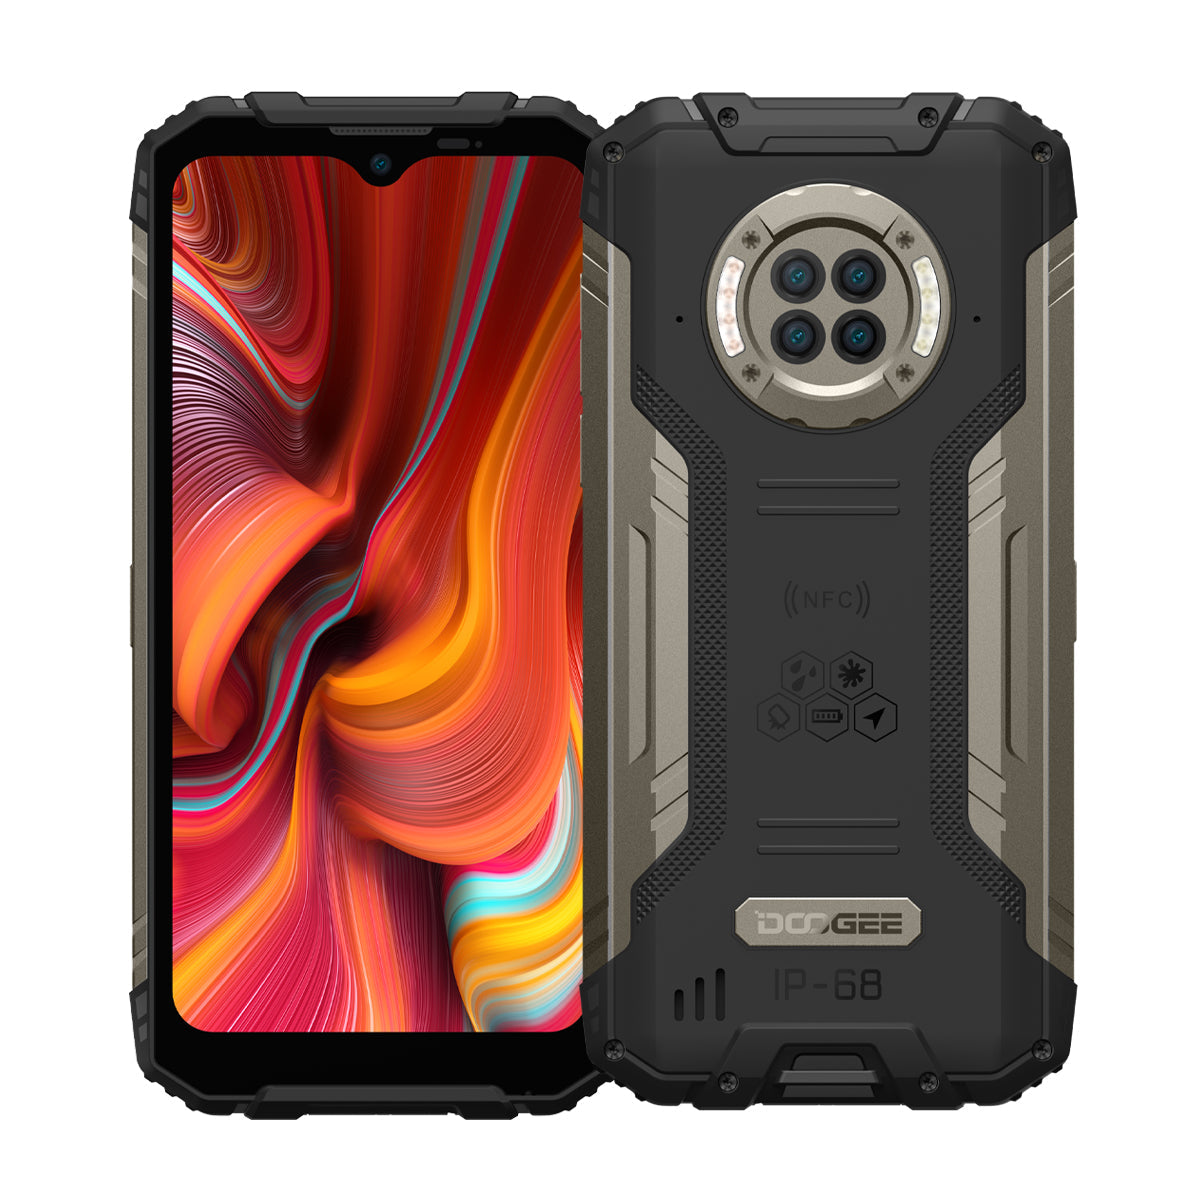 DOOGEE S96 Pro Rugged Phone 8GB+128GB Infrared Night Vision